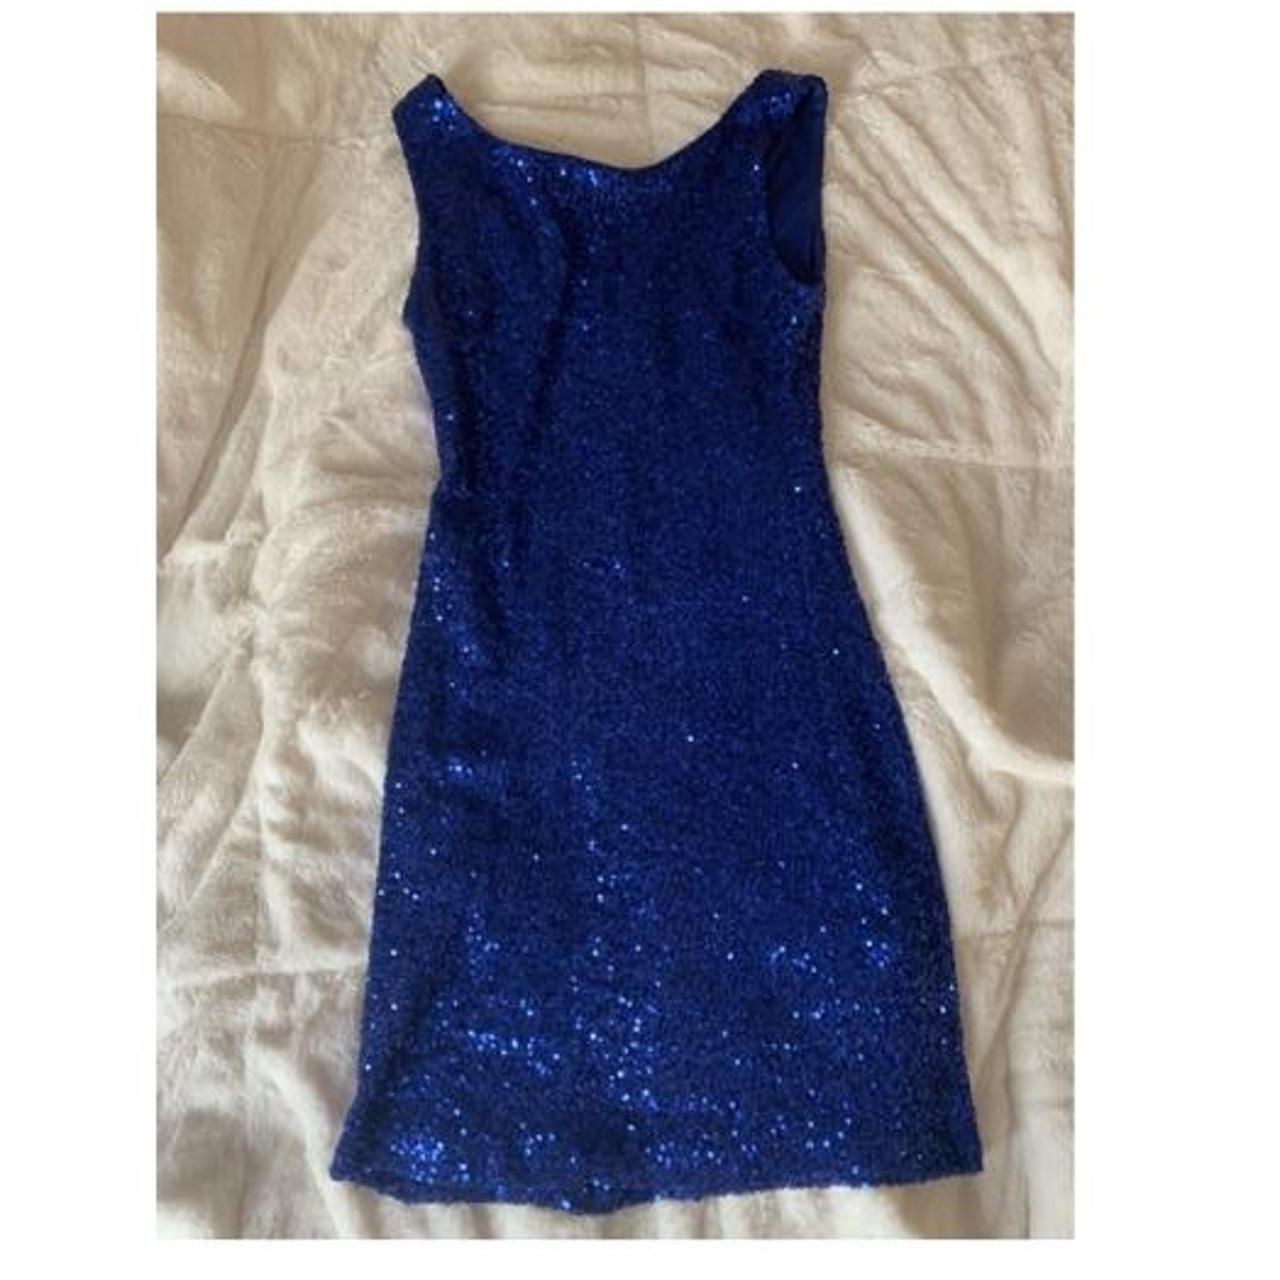 Product Image 1 - Blue sparkle dress form fitting.